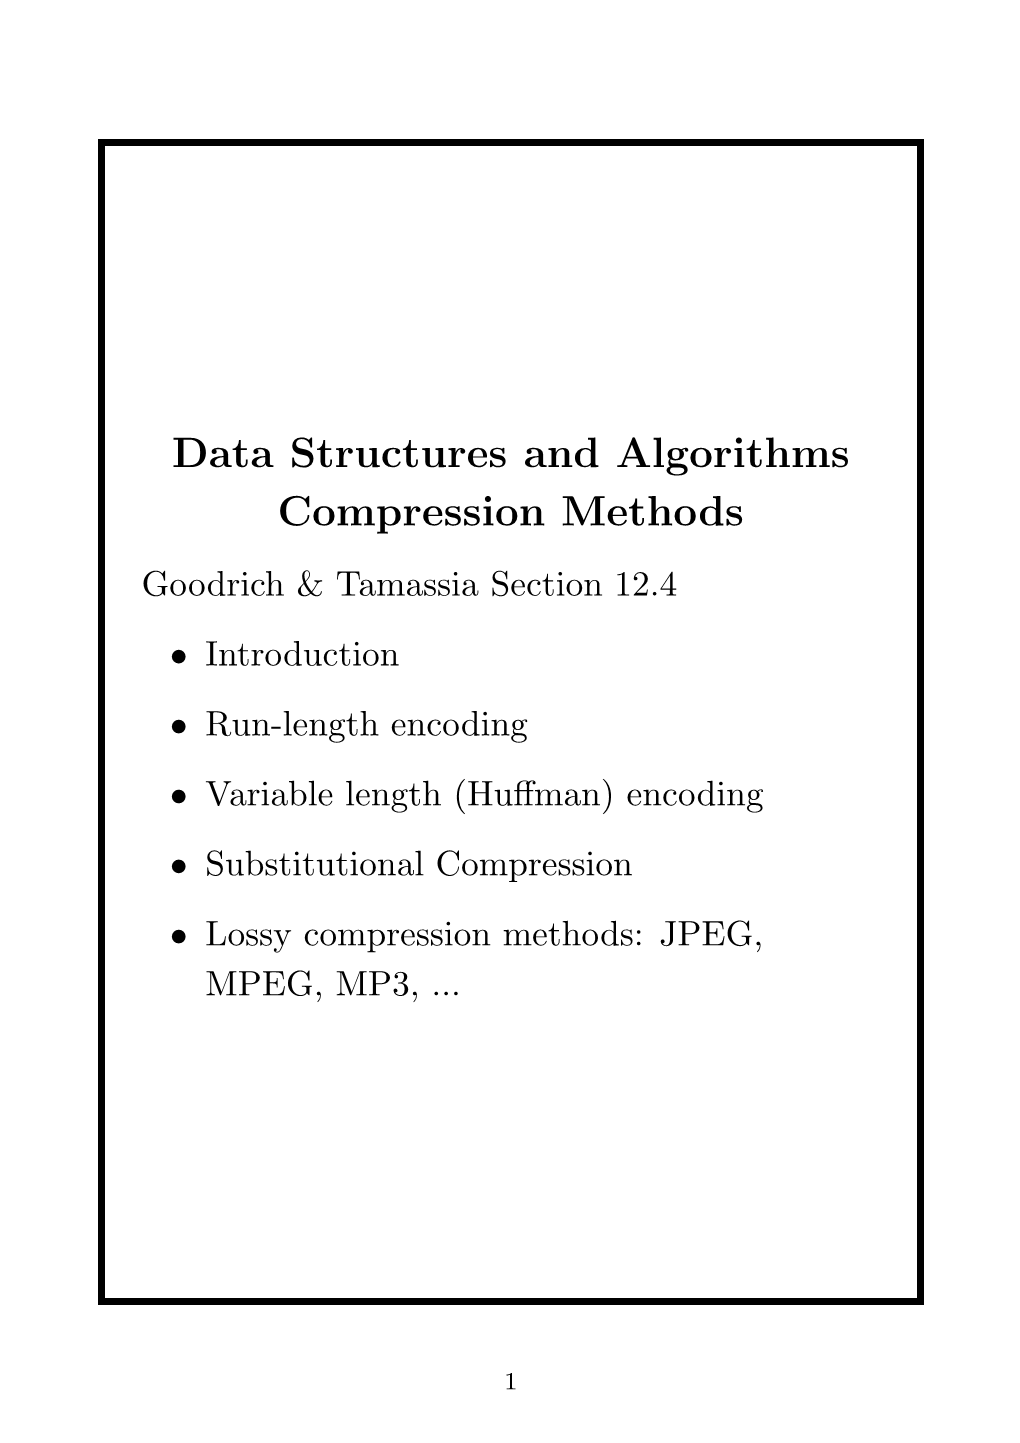 Data Structures and Algorithms Compression Methods